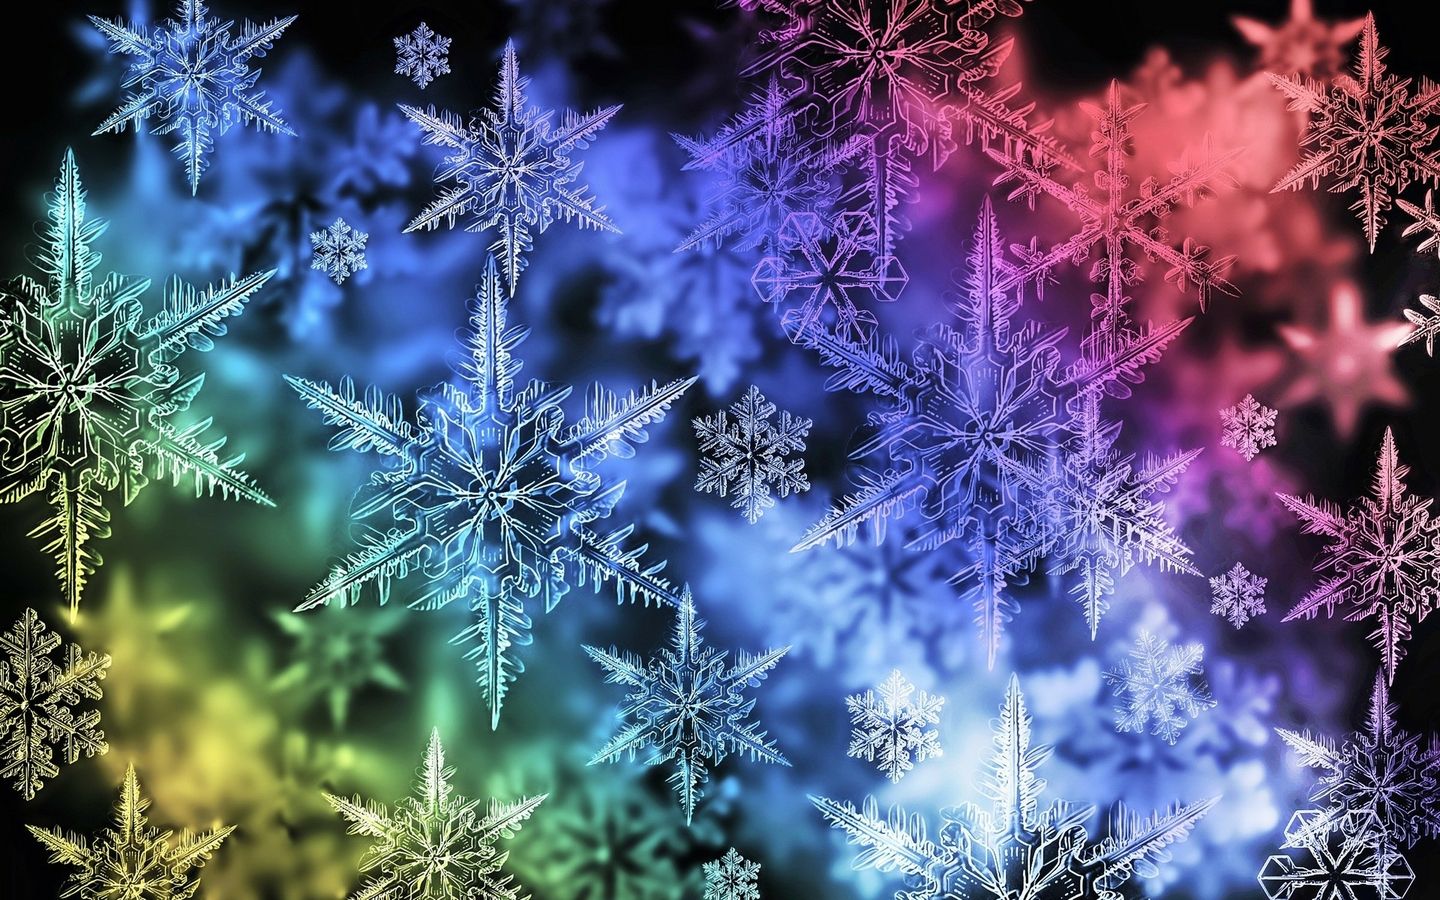 A colorful wallpaper of snowflakes - Snowflake